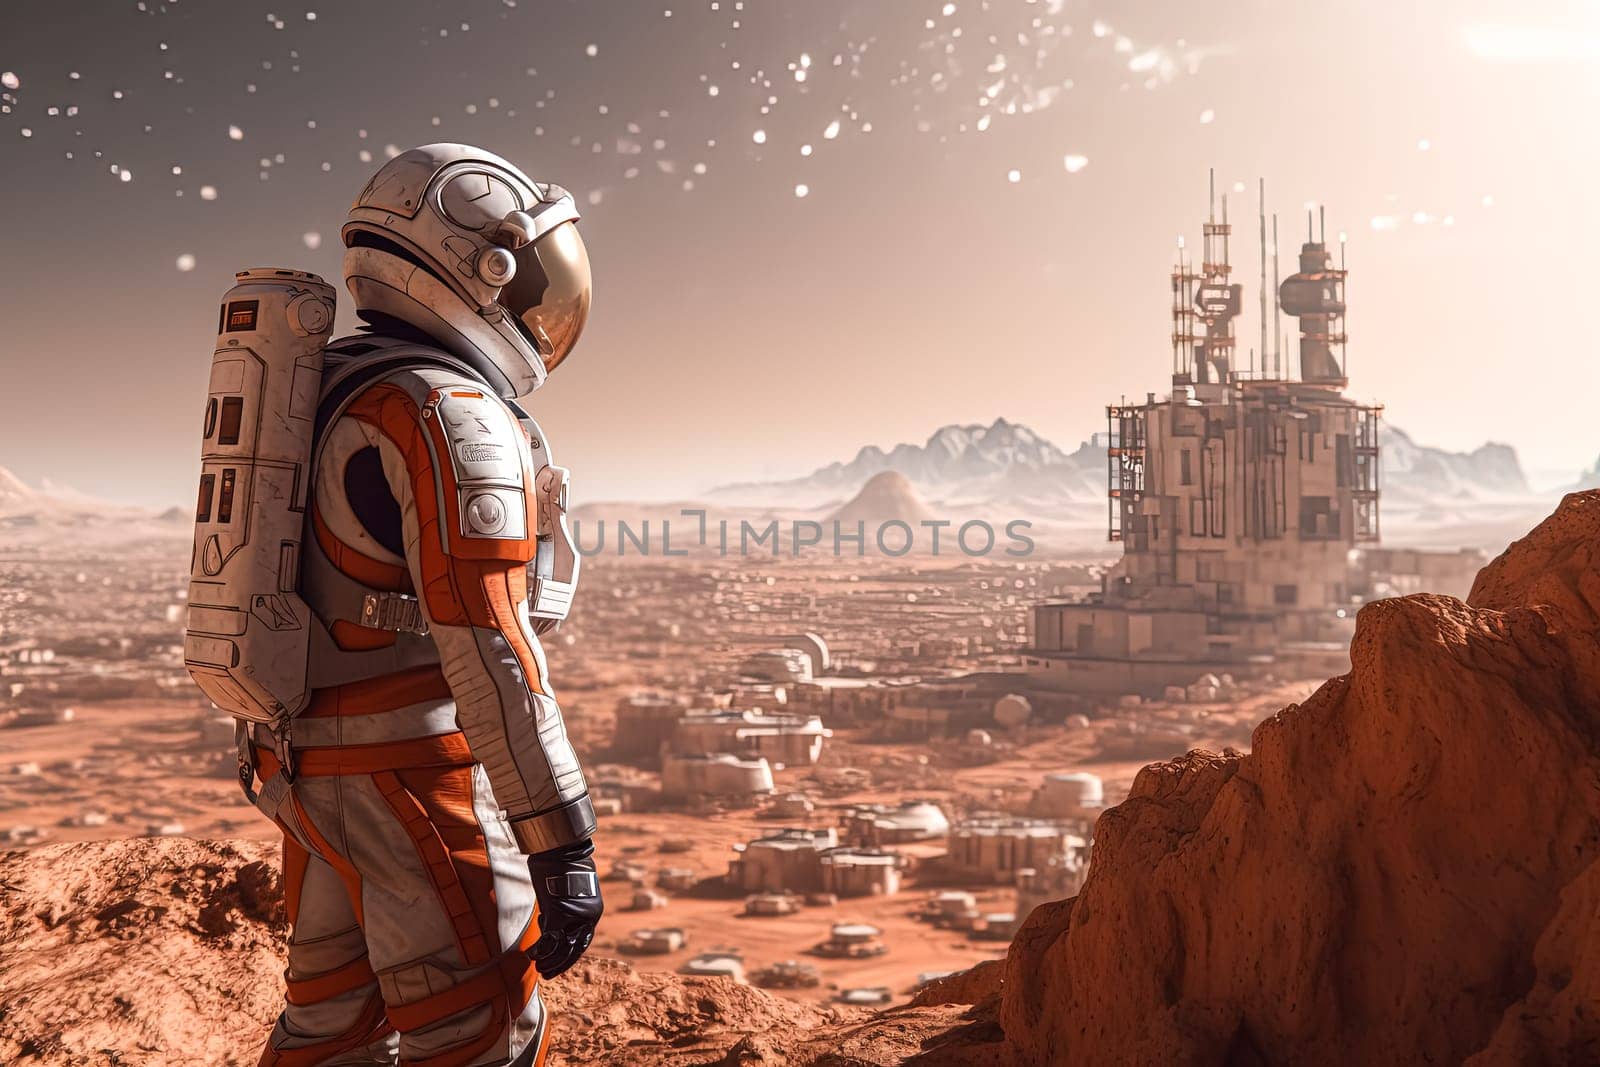 A man in a space suit stands on a rocky surface looking up at a large planet. The scene is set in a barren, desolate landscape with no signs of life